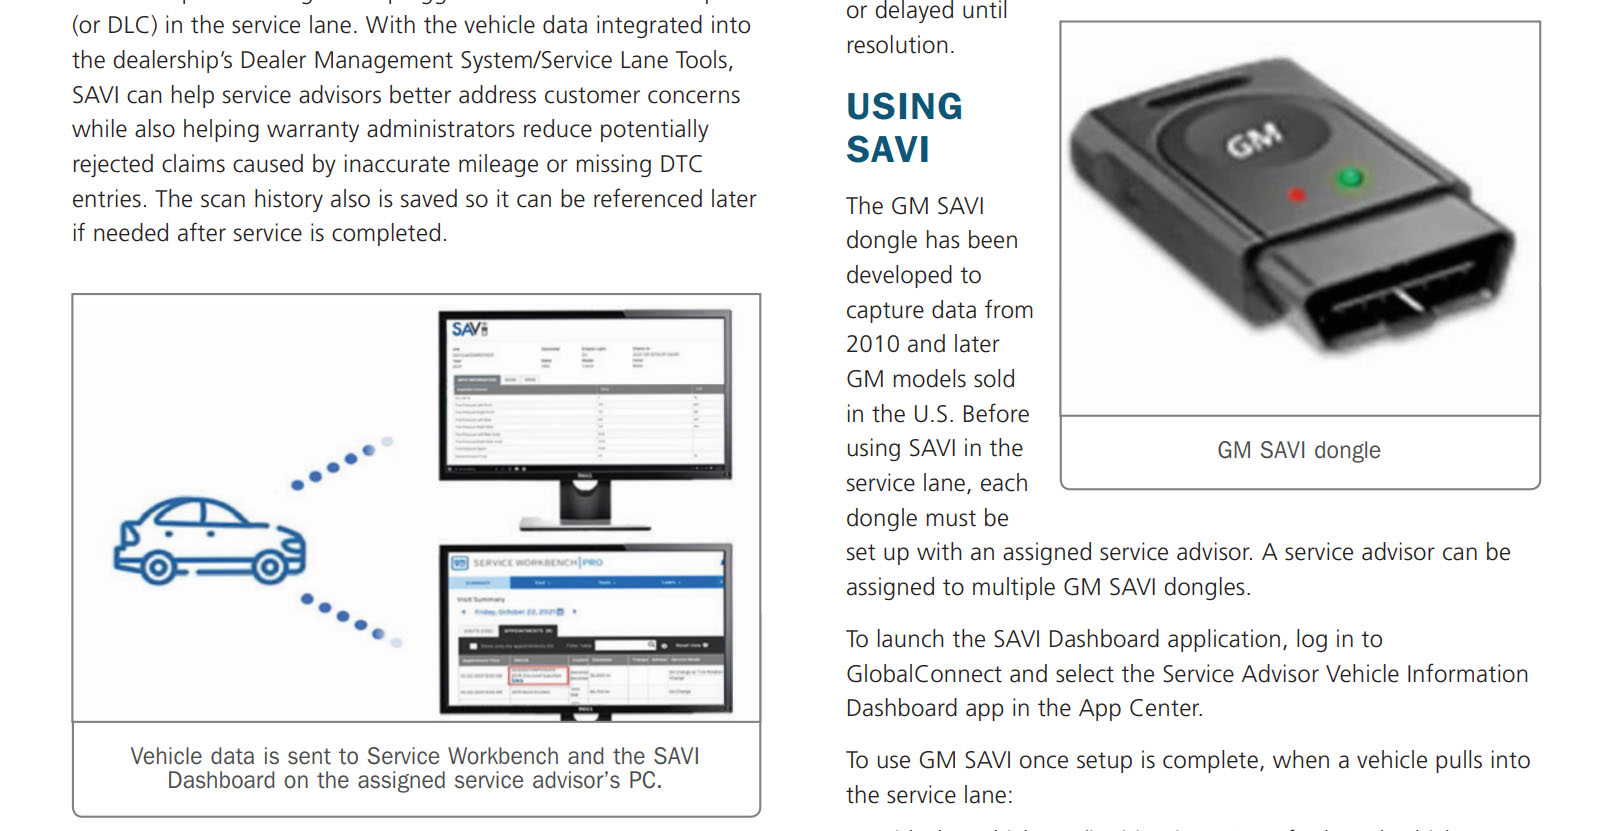 Vehicle Check-In Are Getting "SAVI" for GM Service Advisors